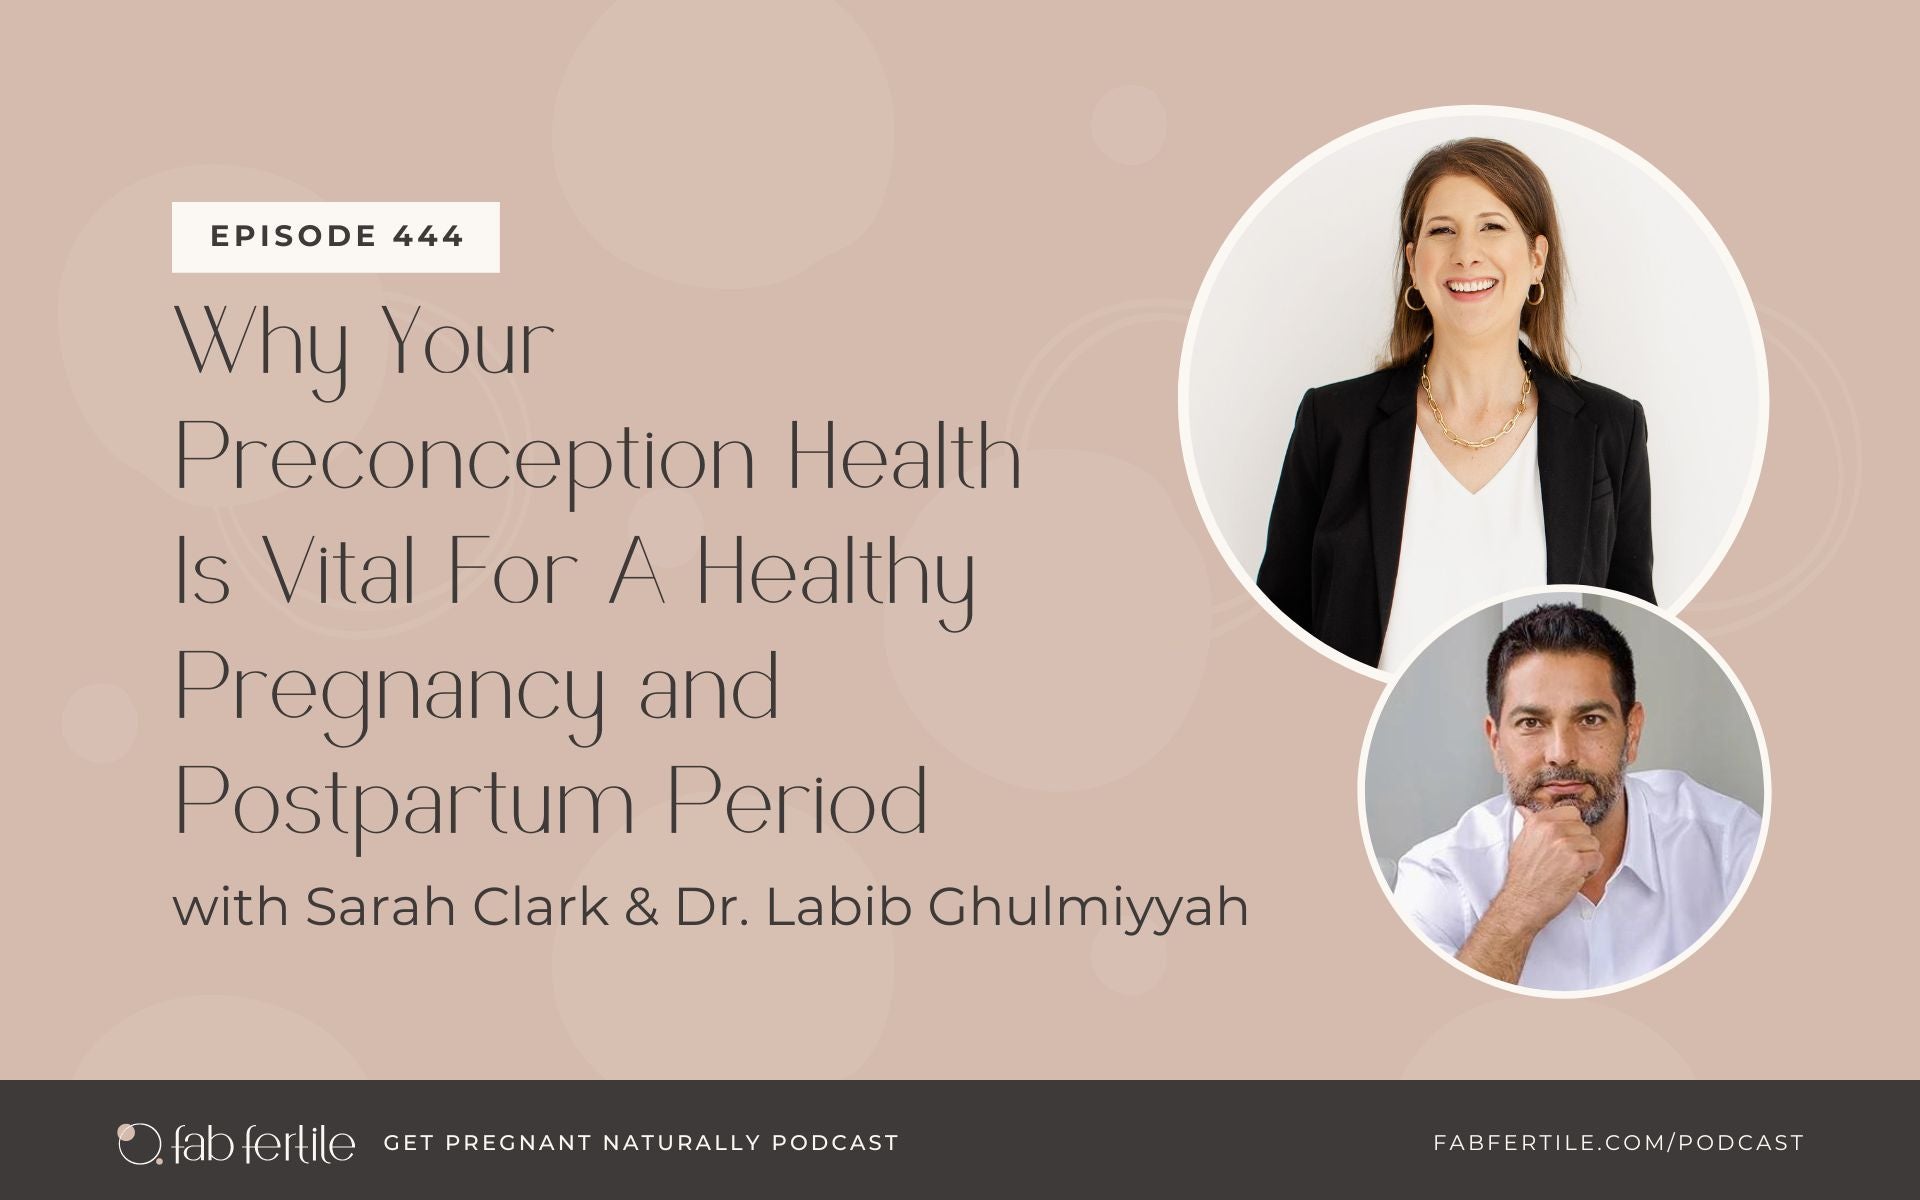 Why Your Preconception Health Is Vital For A Healthy Pregnancy and Postpartum Period with Dr. Labib Ghulmiyyah